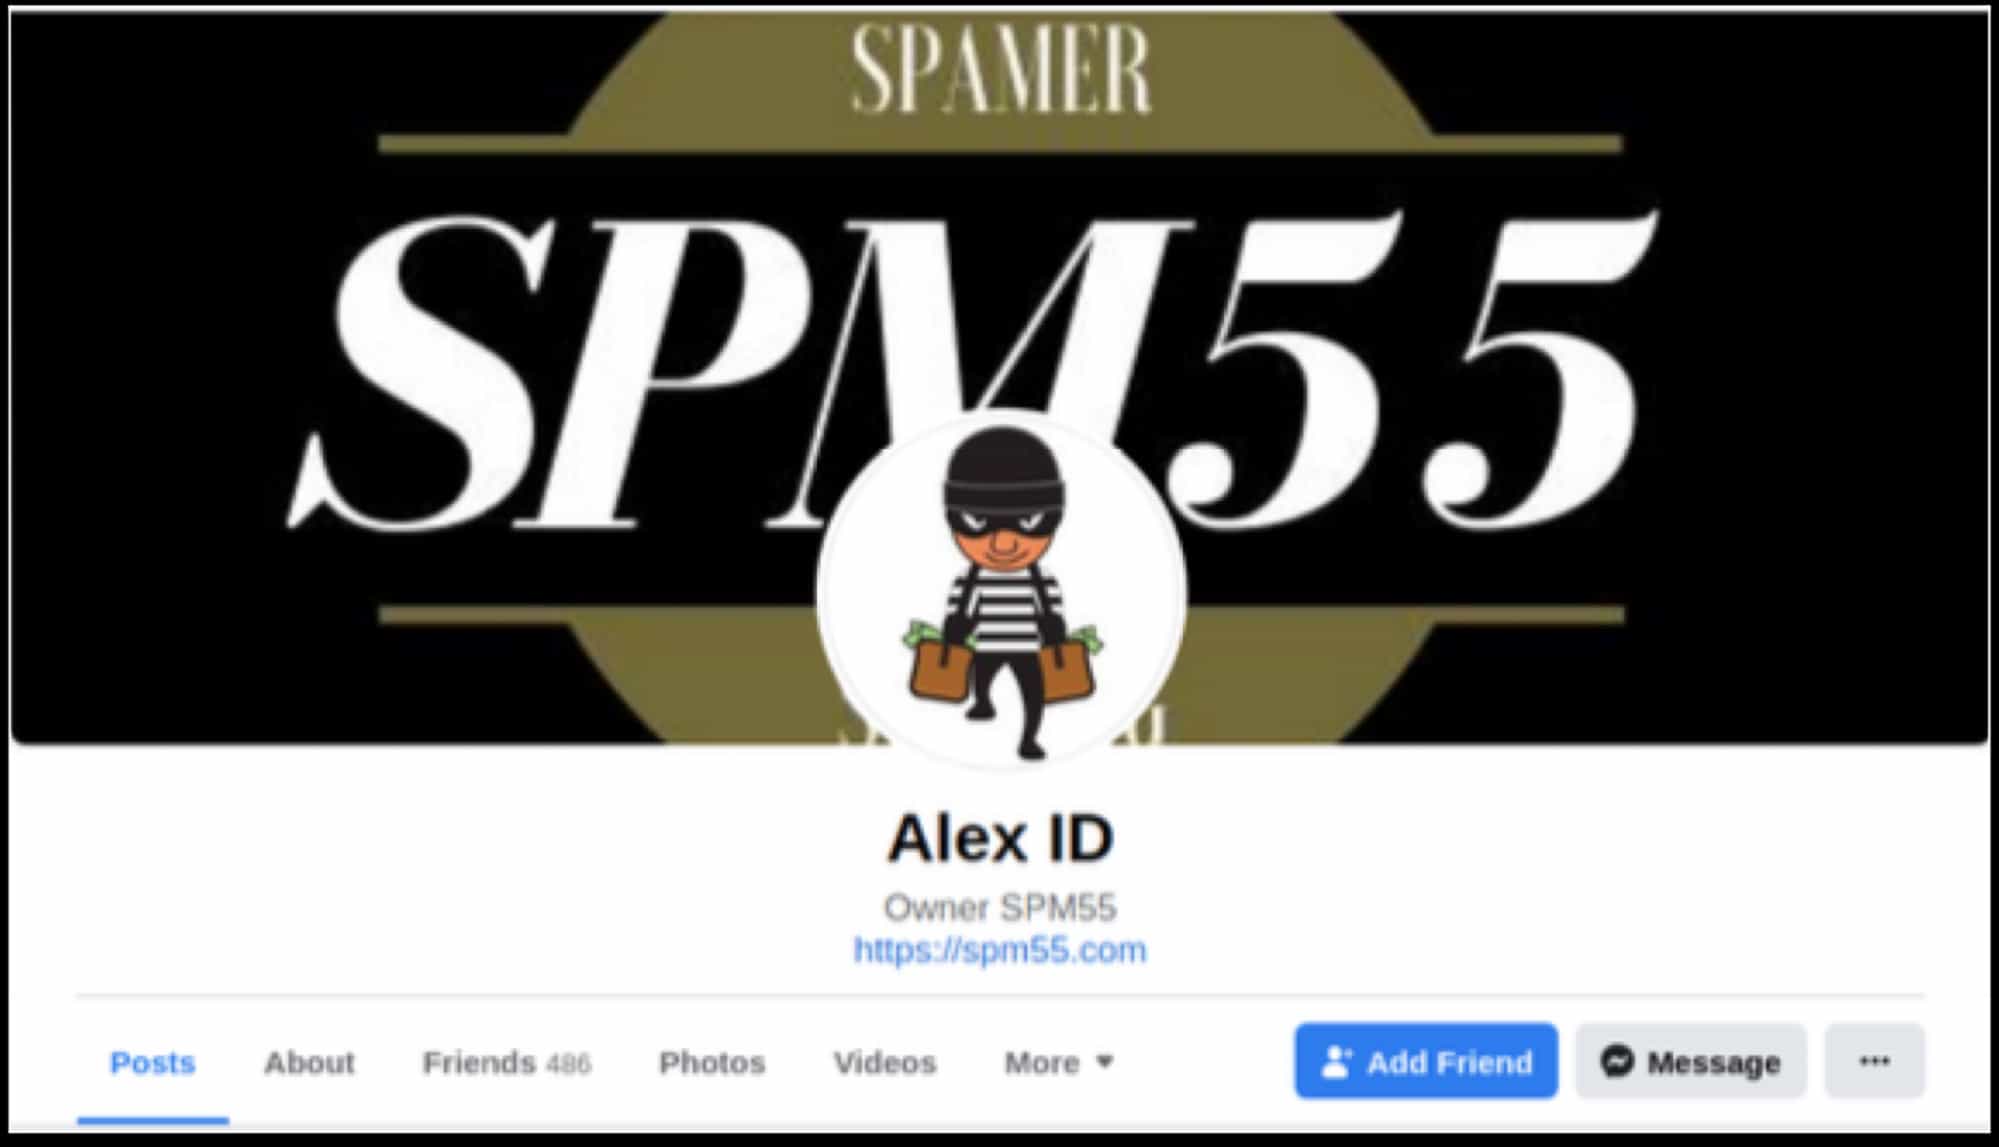 SPM55 operates out of Indonesia and its owner-admin uses the handle “AlexID” (among others). While AlexID is not the only SPM55 administrator, they appear to run the organization.